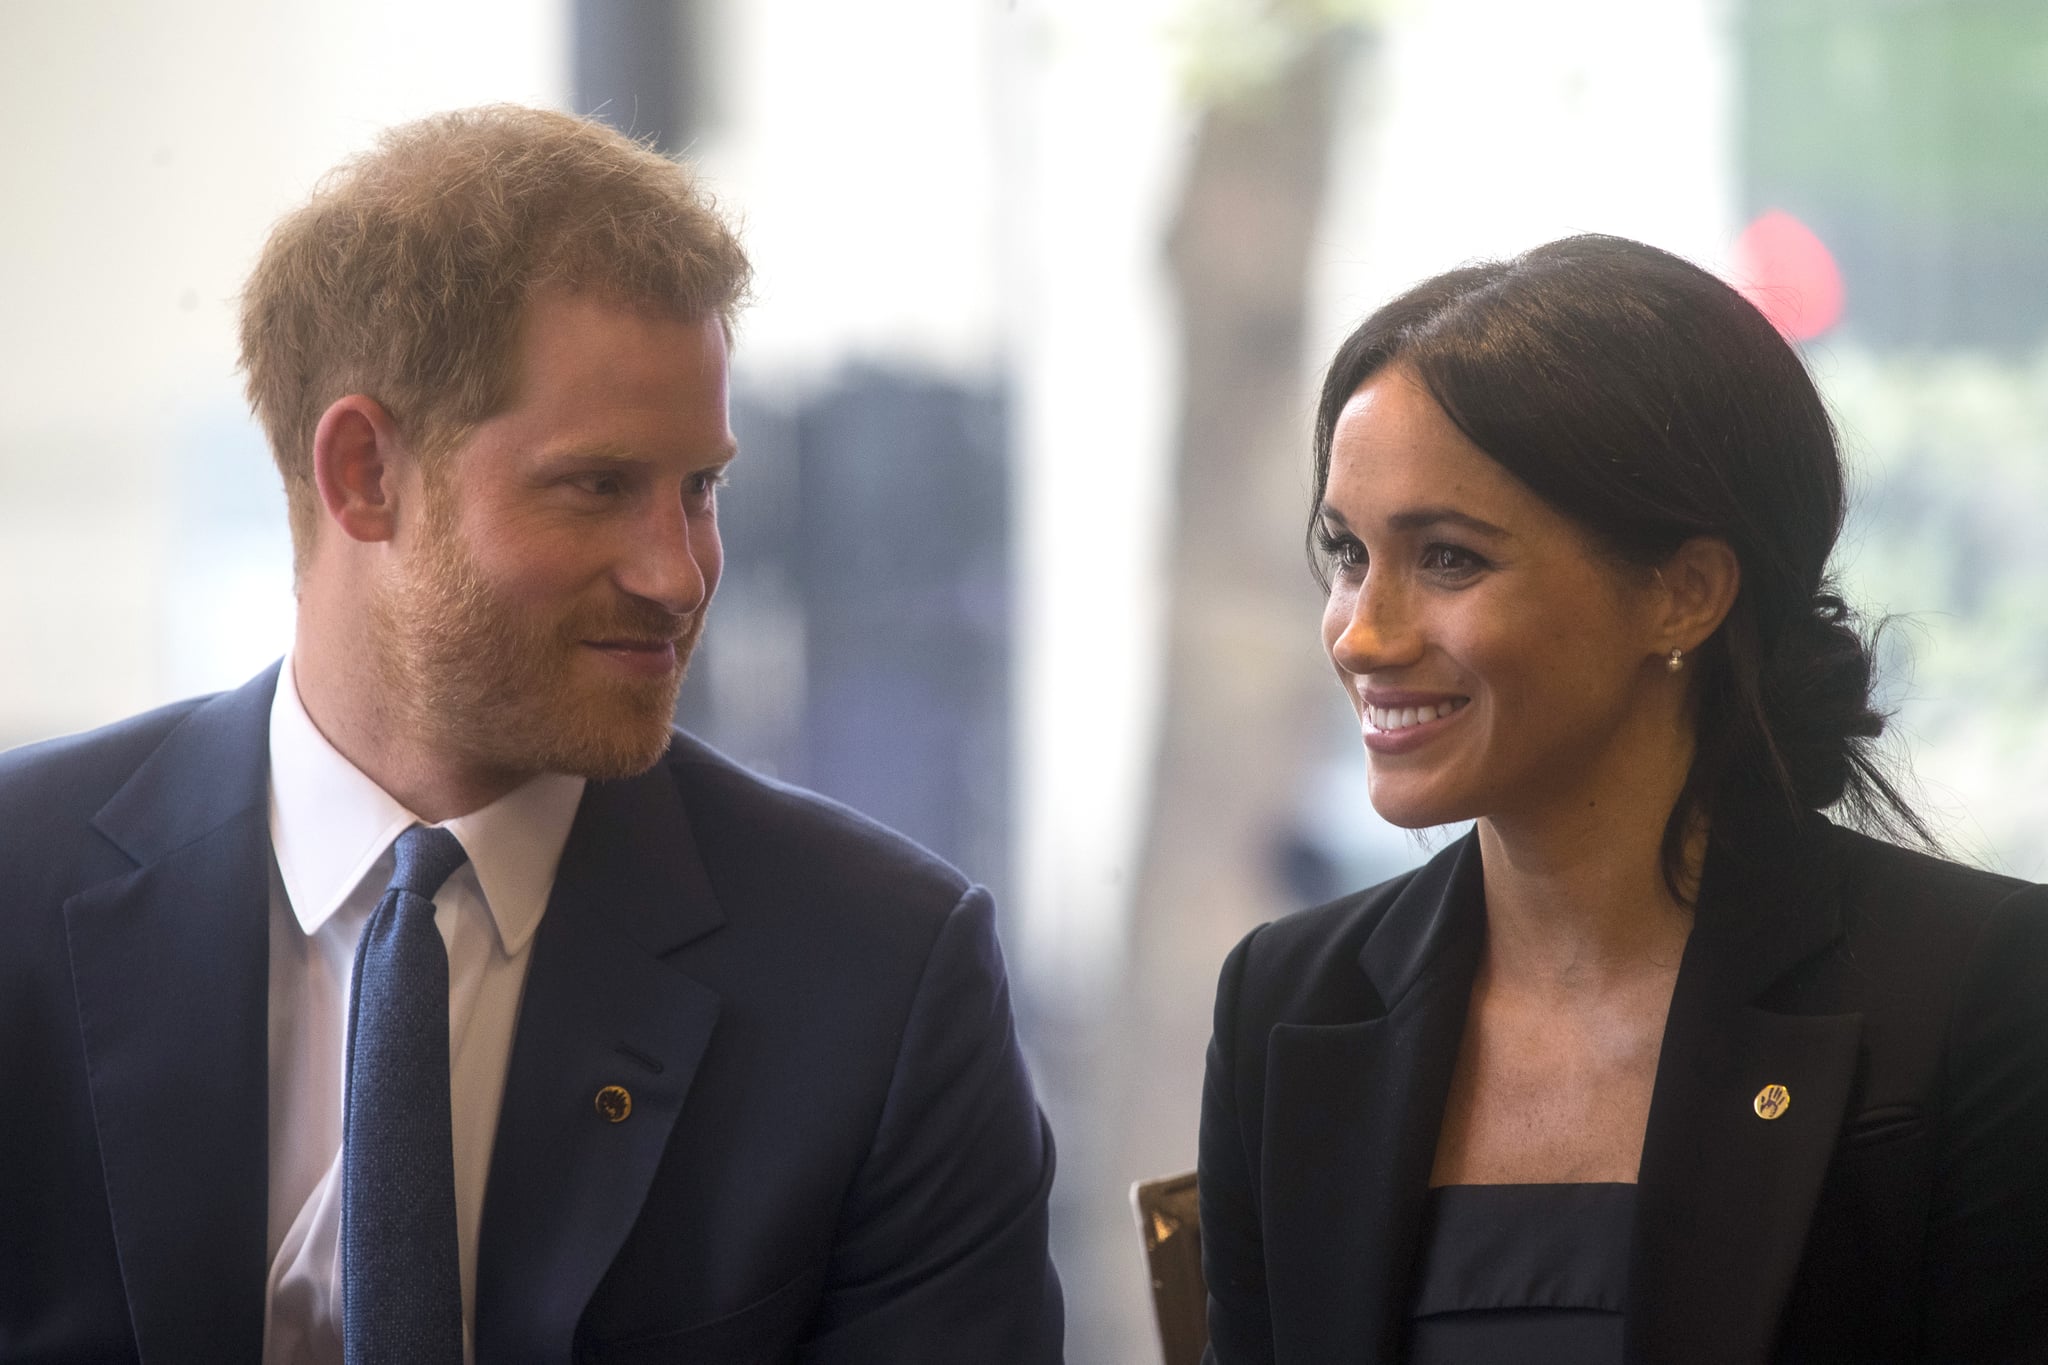 LONDON, ENGLAND - SEPTEMBER 04: Prince Harry, Duke of Sussex and Meghan, Duchess of Sussex attend the WellChild awards at Royal Lancaster Hotel on September 4, 2018 in London, England.  The Duke of Sussex has been patron of WellChild since 2007. (Photo by Victoria Jones - WPA Pool/Getty Images)